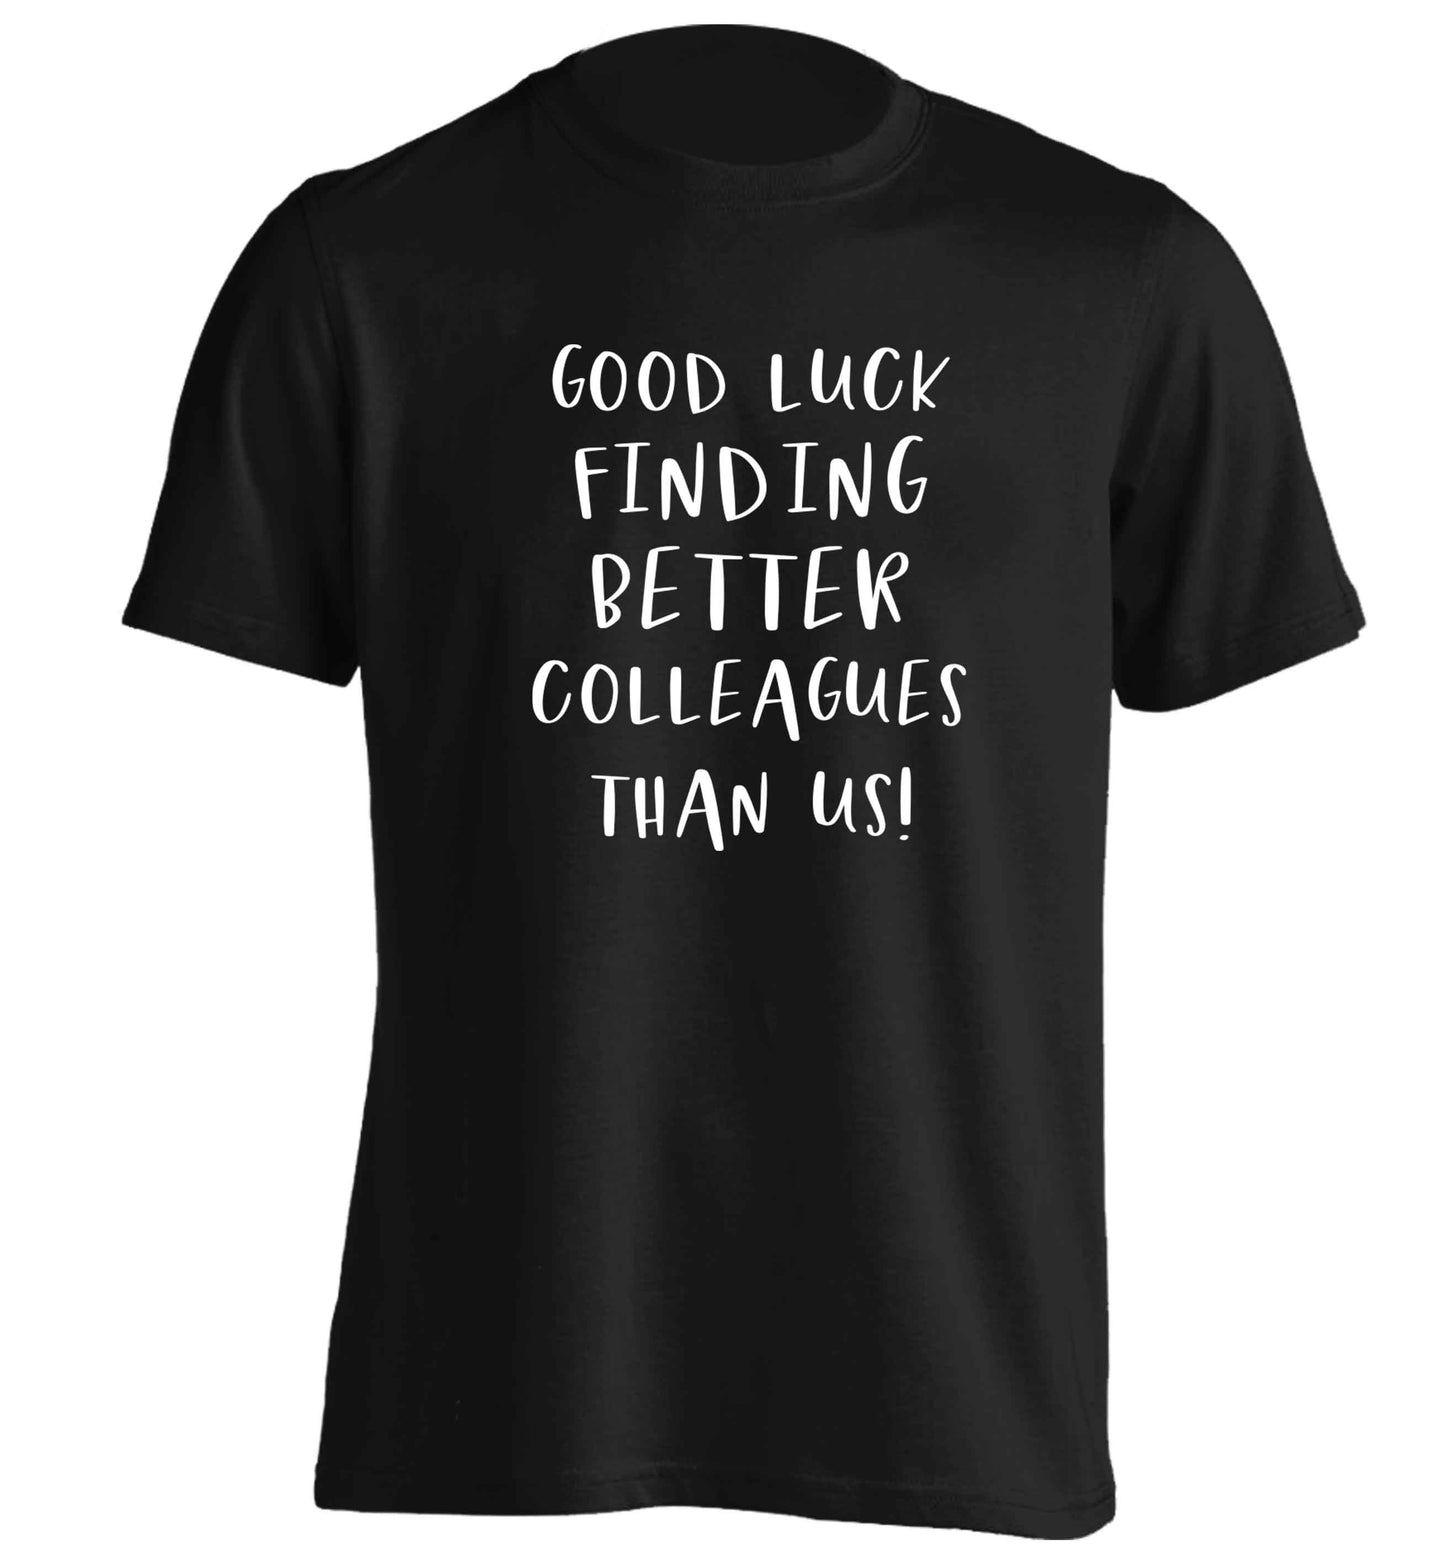 Good luck finding better colleagues than us! adults unisex black Tshirt 2XL